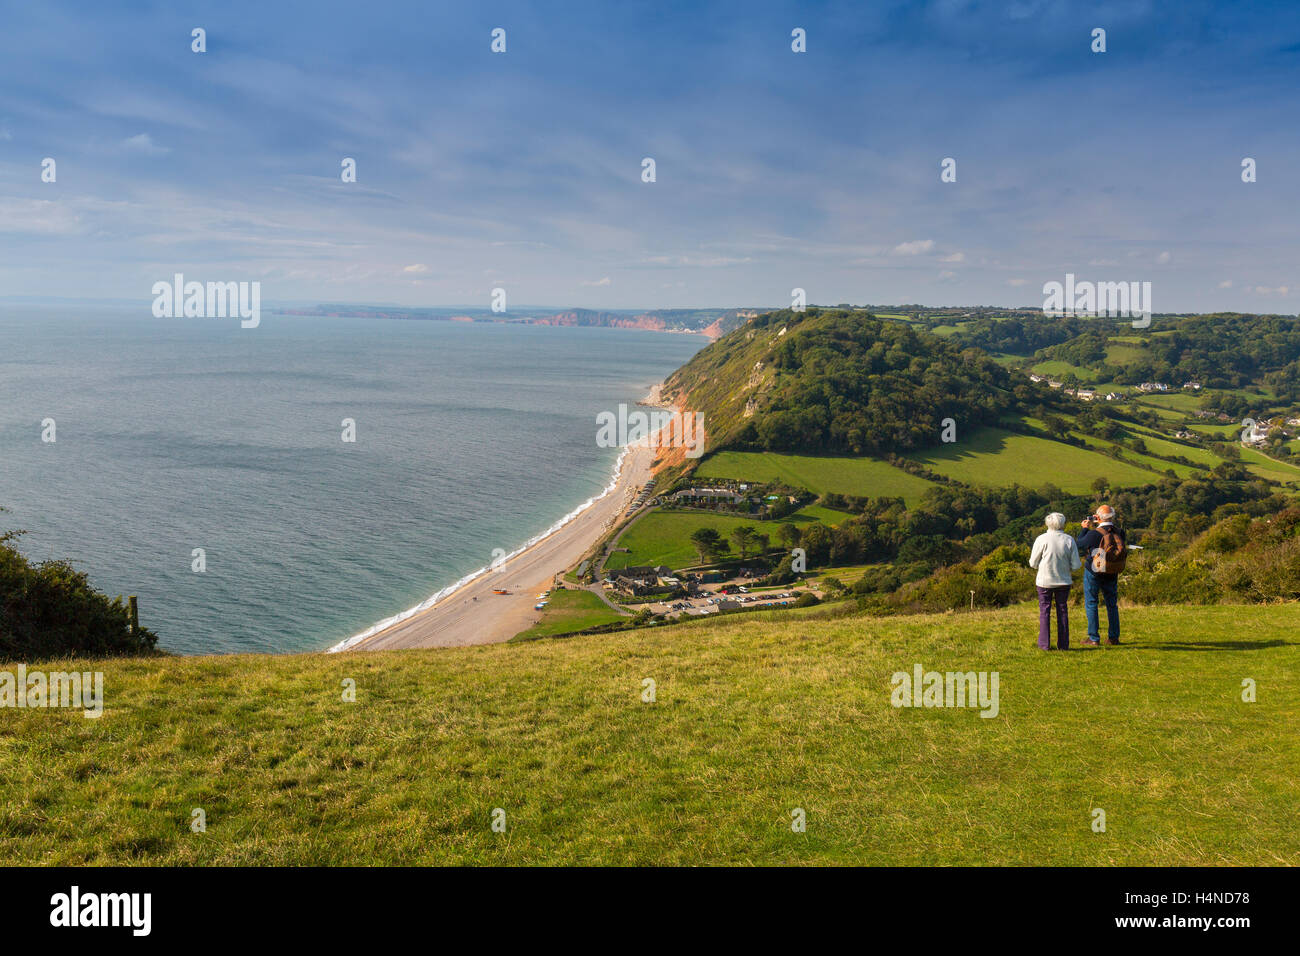 Looking west from the top of East Cliff near Branscombe on the Jurassic Coast of South Devon, England, UK Stock Photo